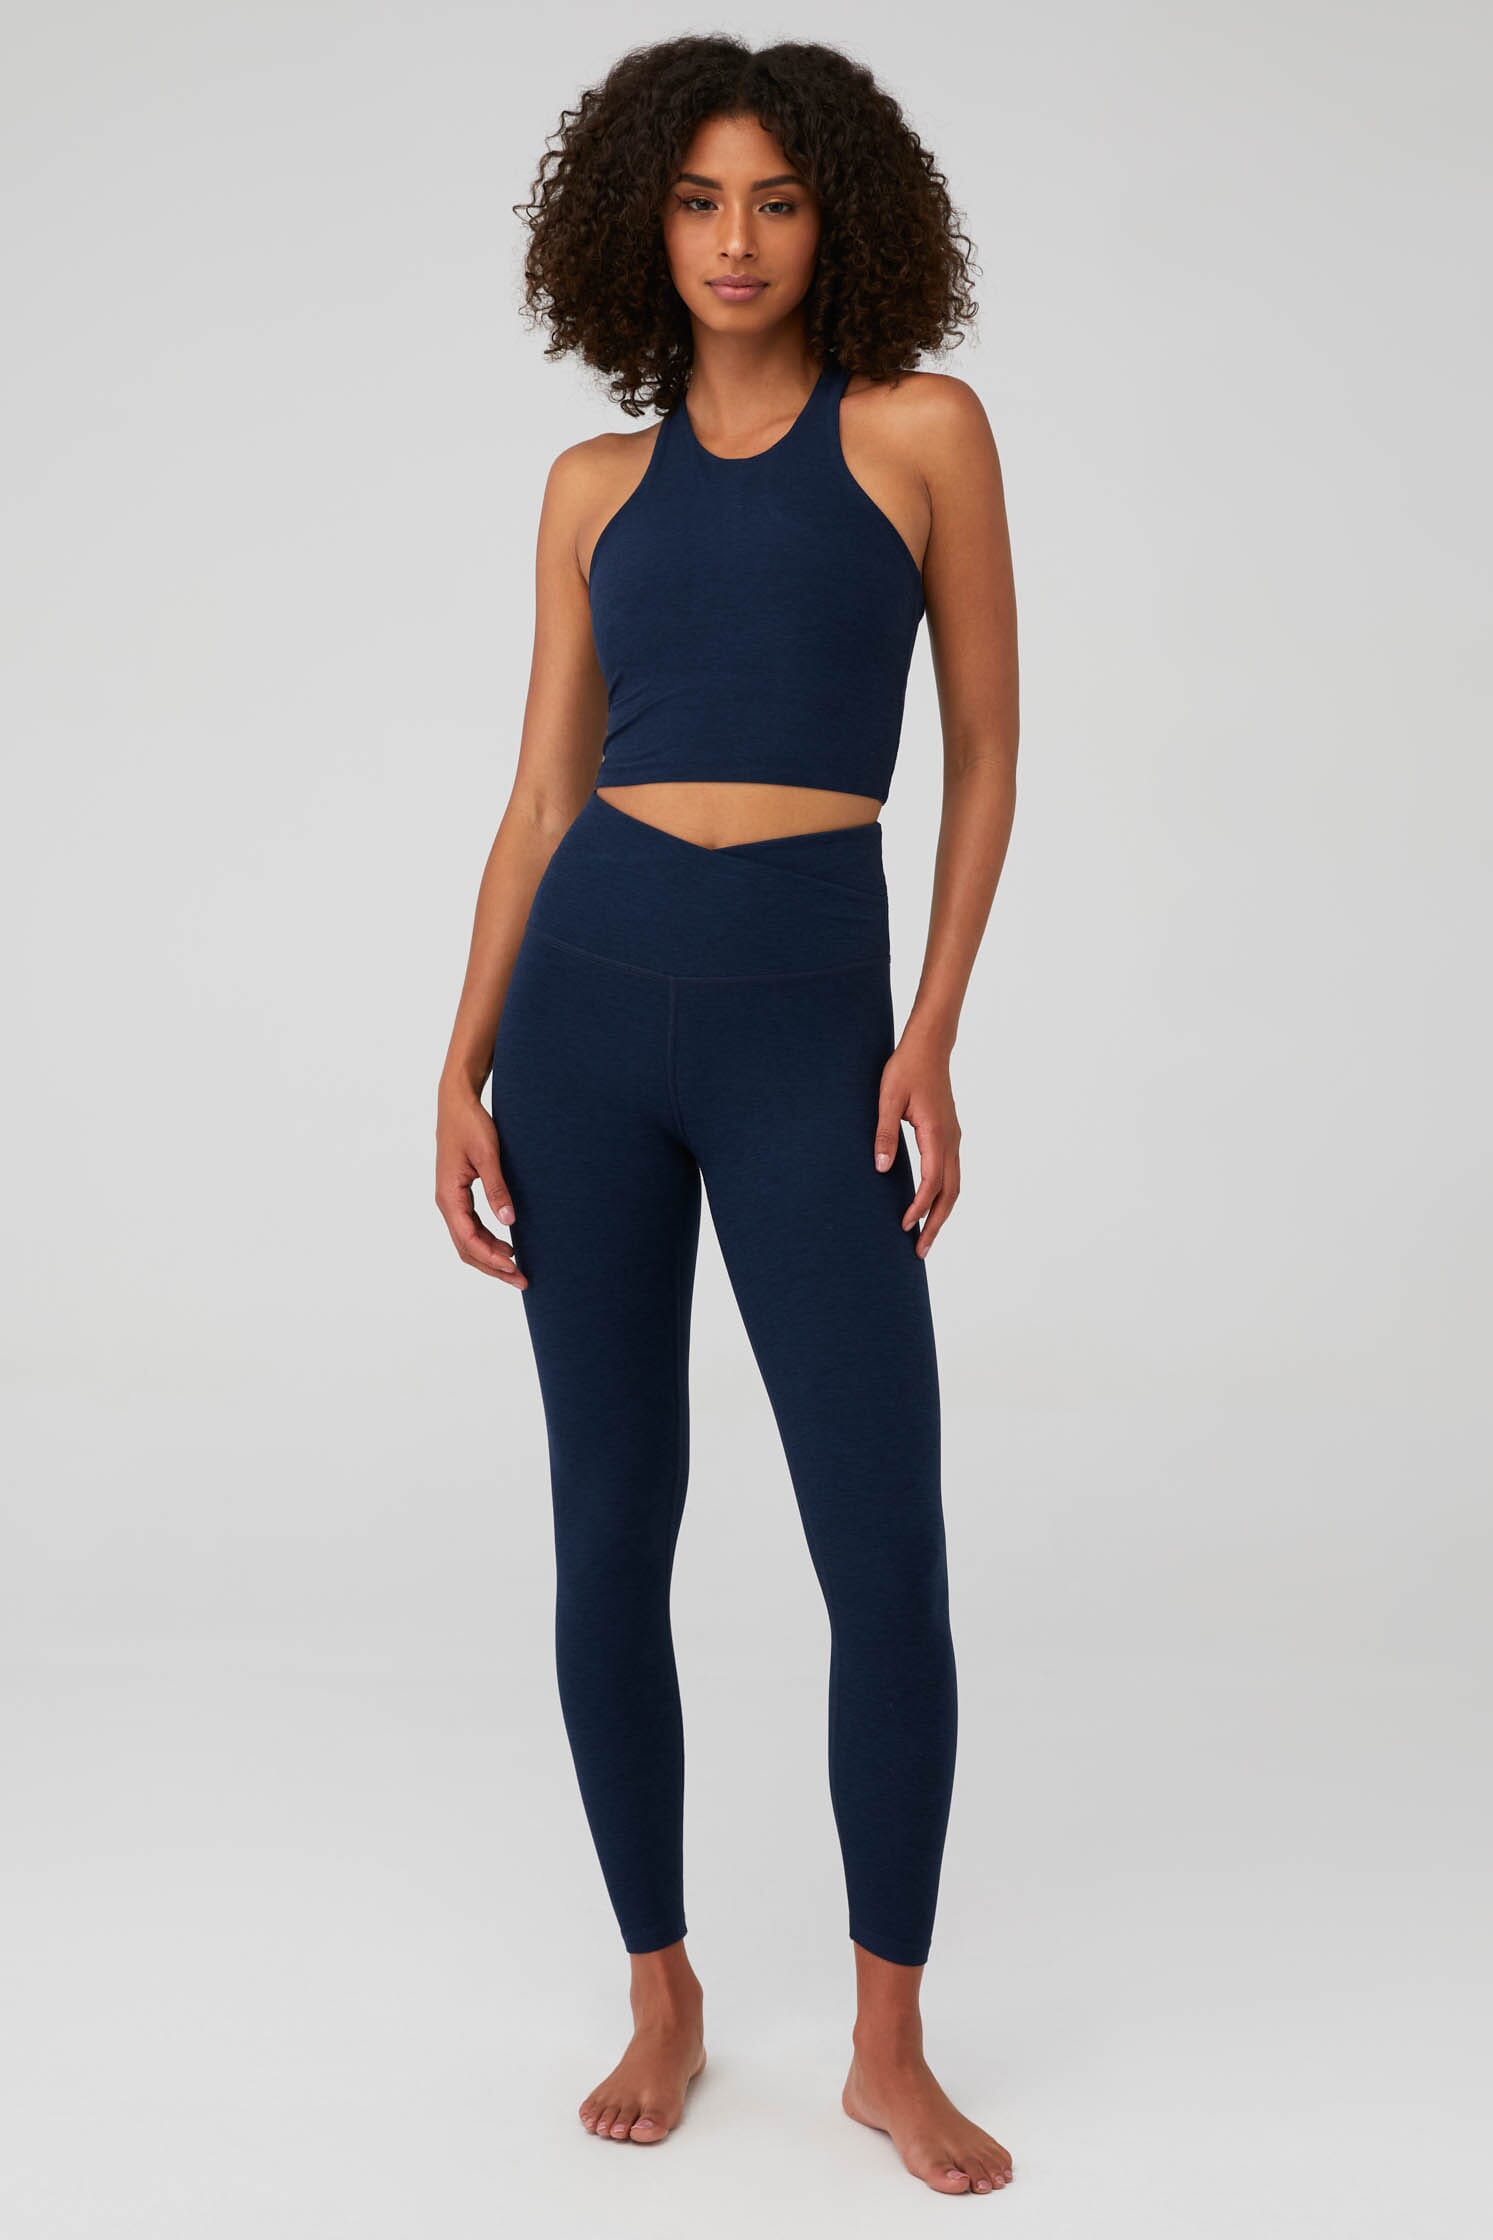 Beyond Yoga, Spacedye At Your Leisure High Waisted Midi Legging in  Nocturnal Navy